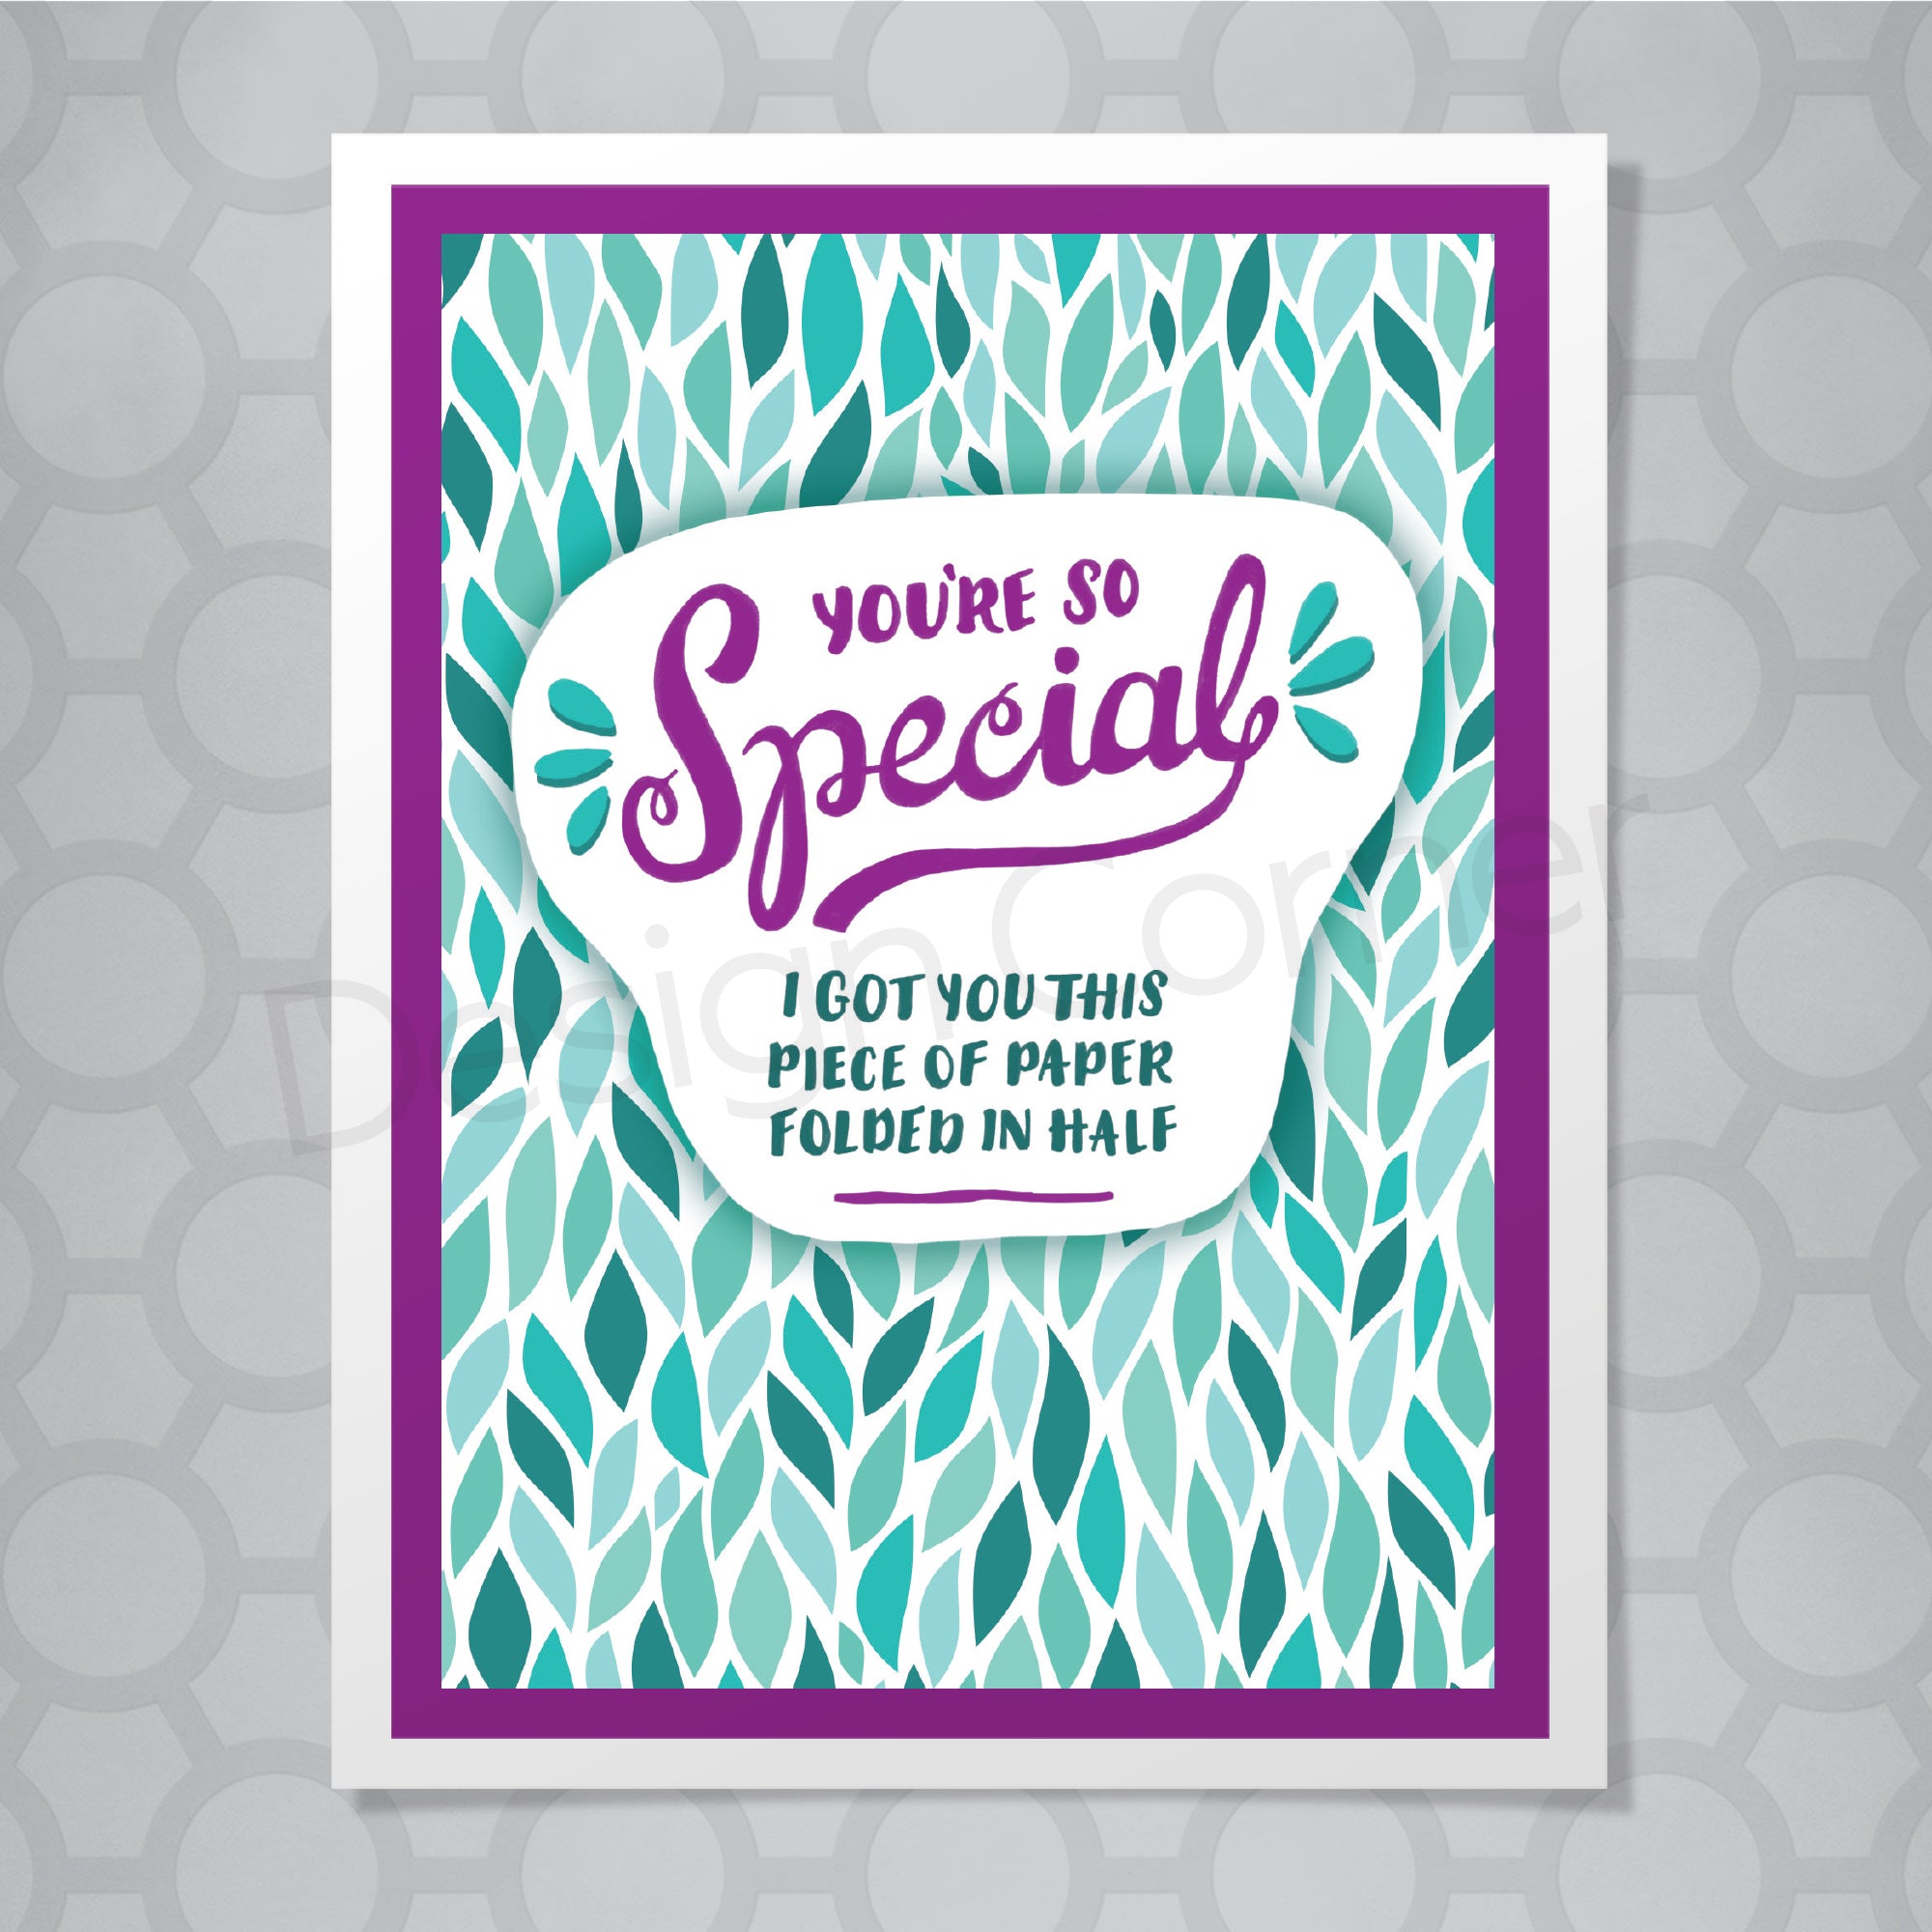 Hand lettered type on front of greeting card that says "You're so special I got you this piece of paper folded in half."